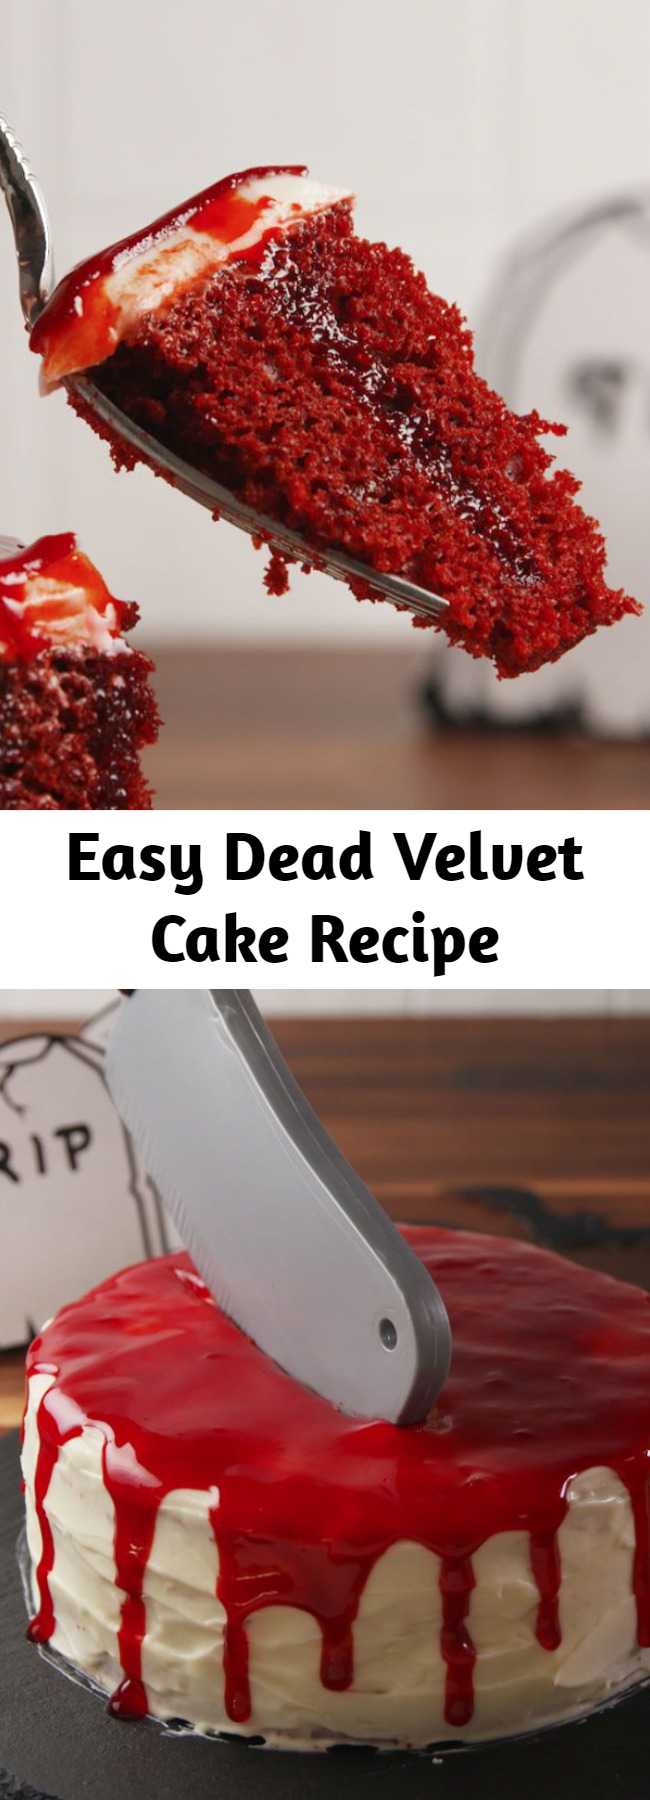 Easy Dead Velvet Cake Recipe - A cake bloody enough and delicious enough for your Halloween party.